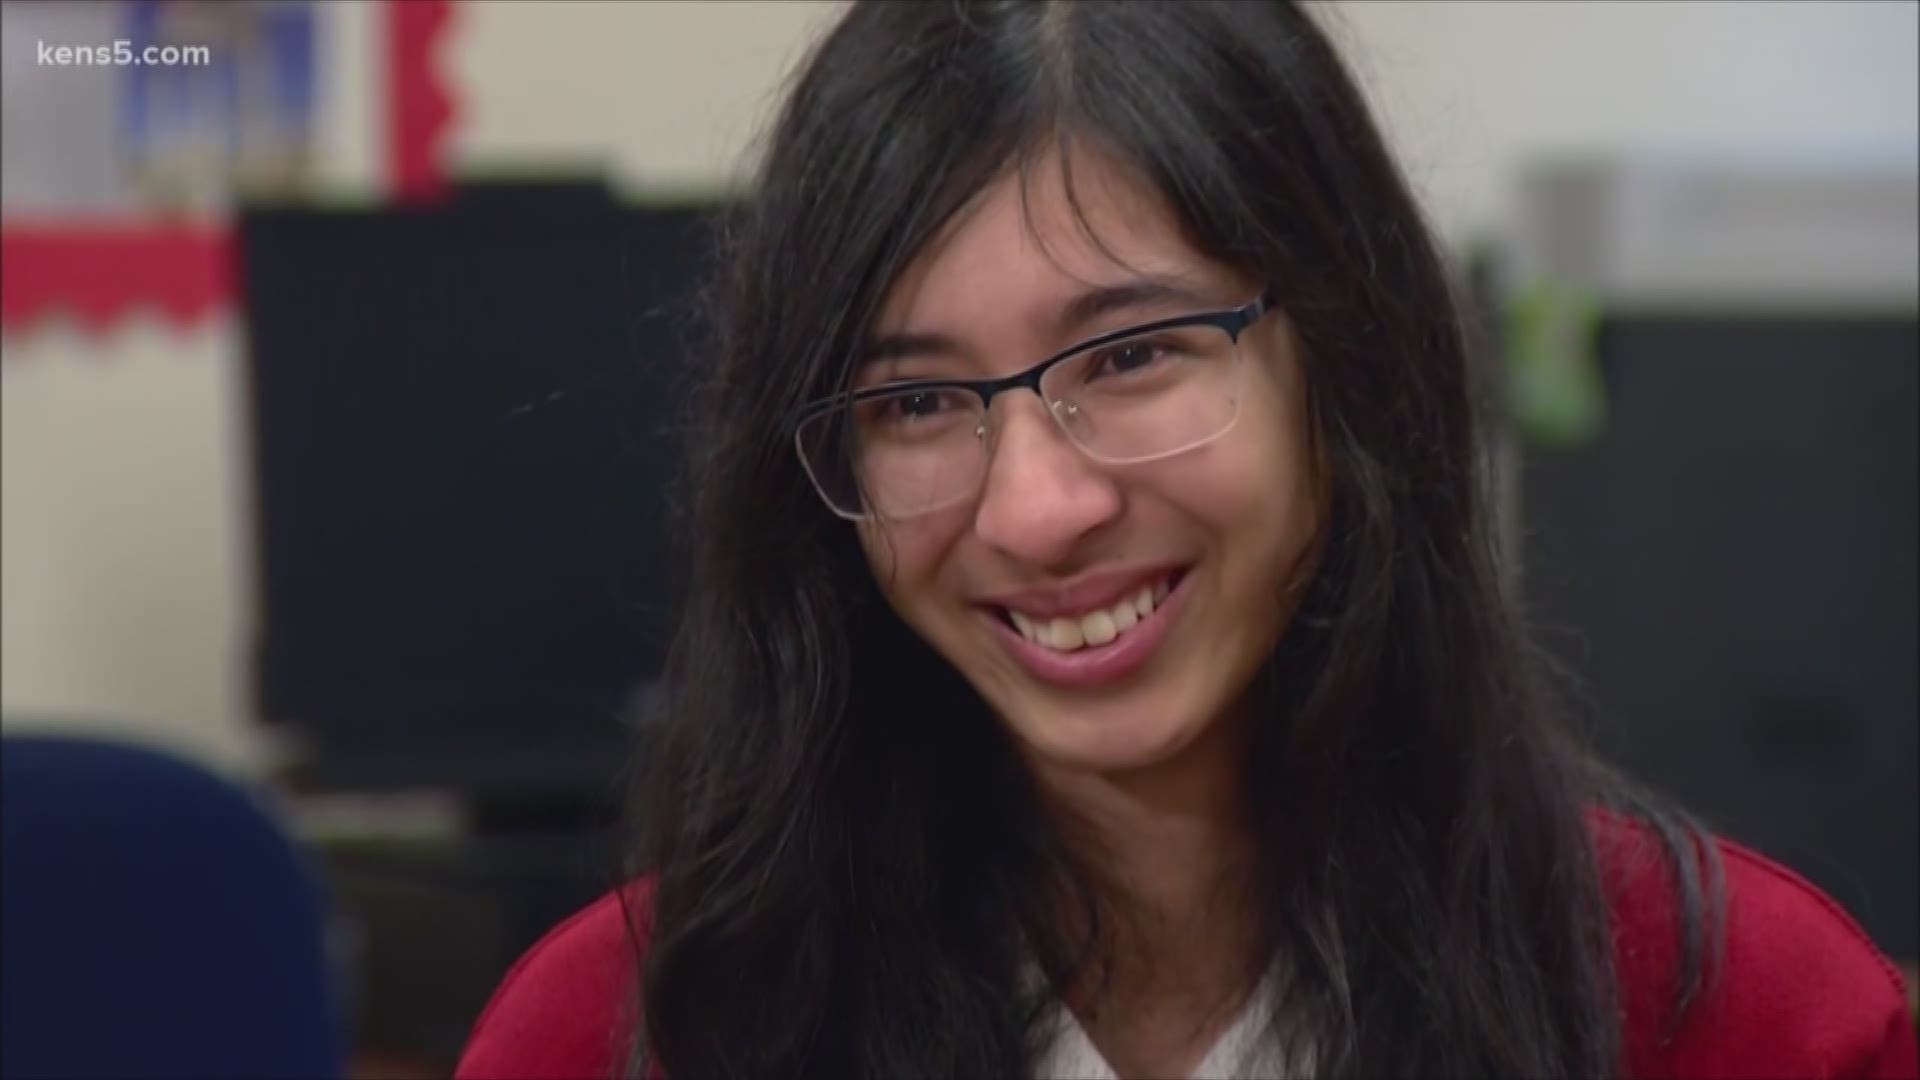 1920px x 1080px - This high school student got a full ride to MIT | Kids Who Make SA Great |  kens5.com